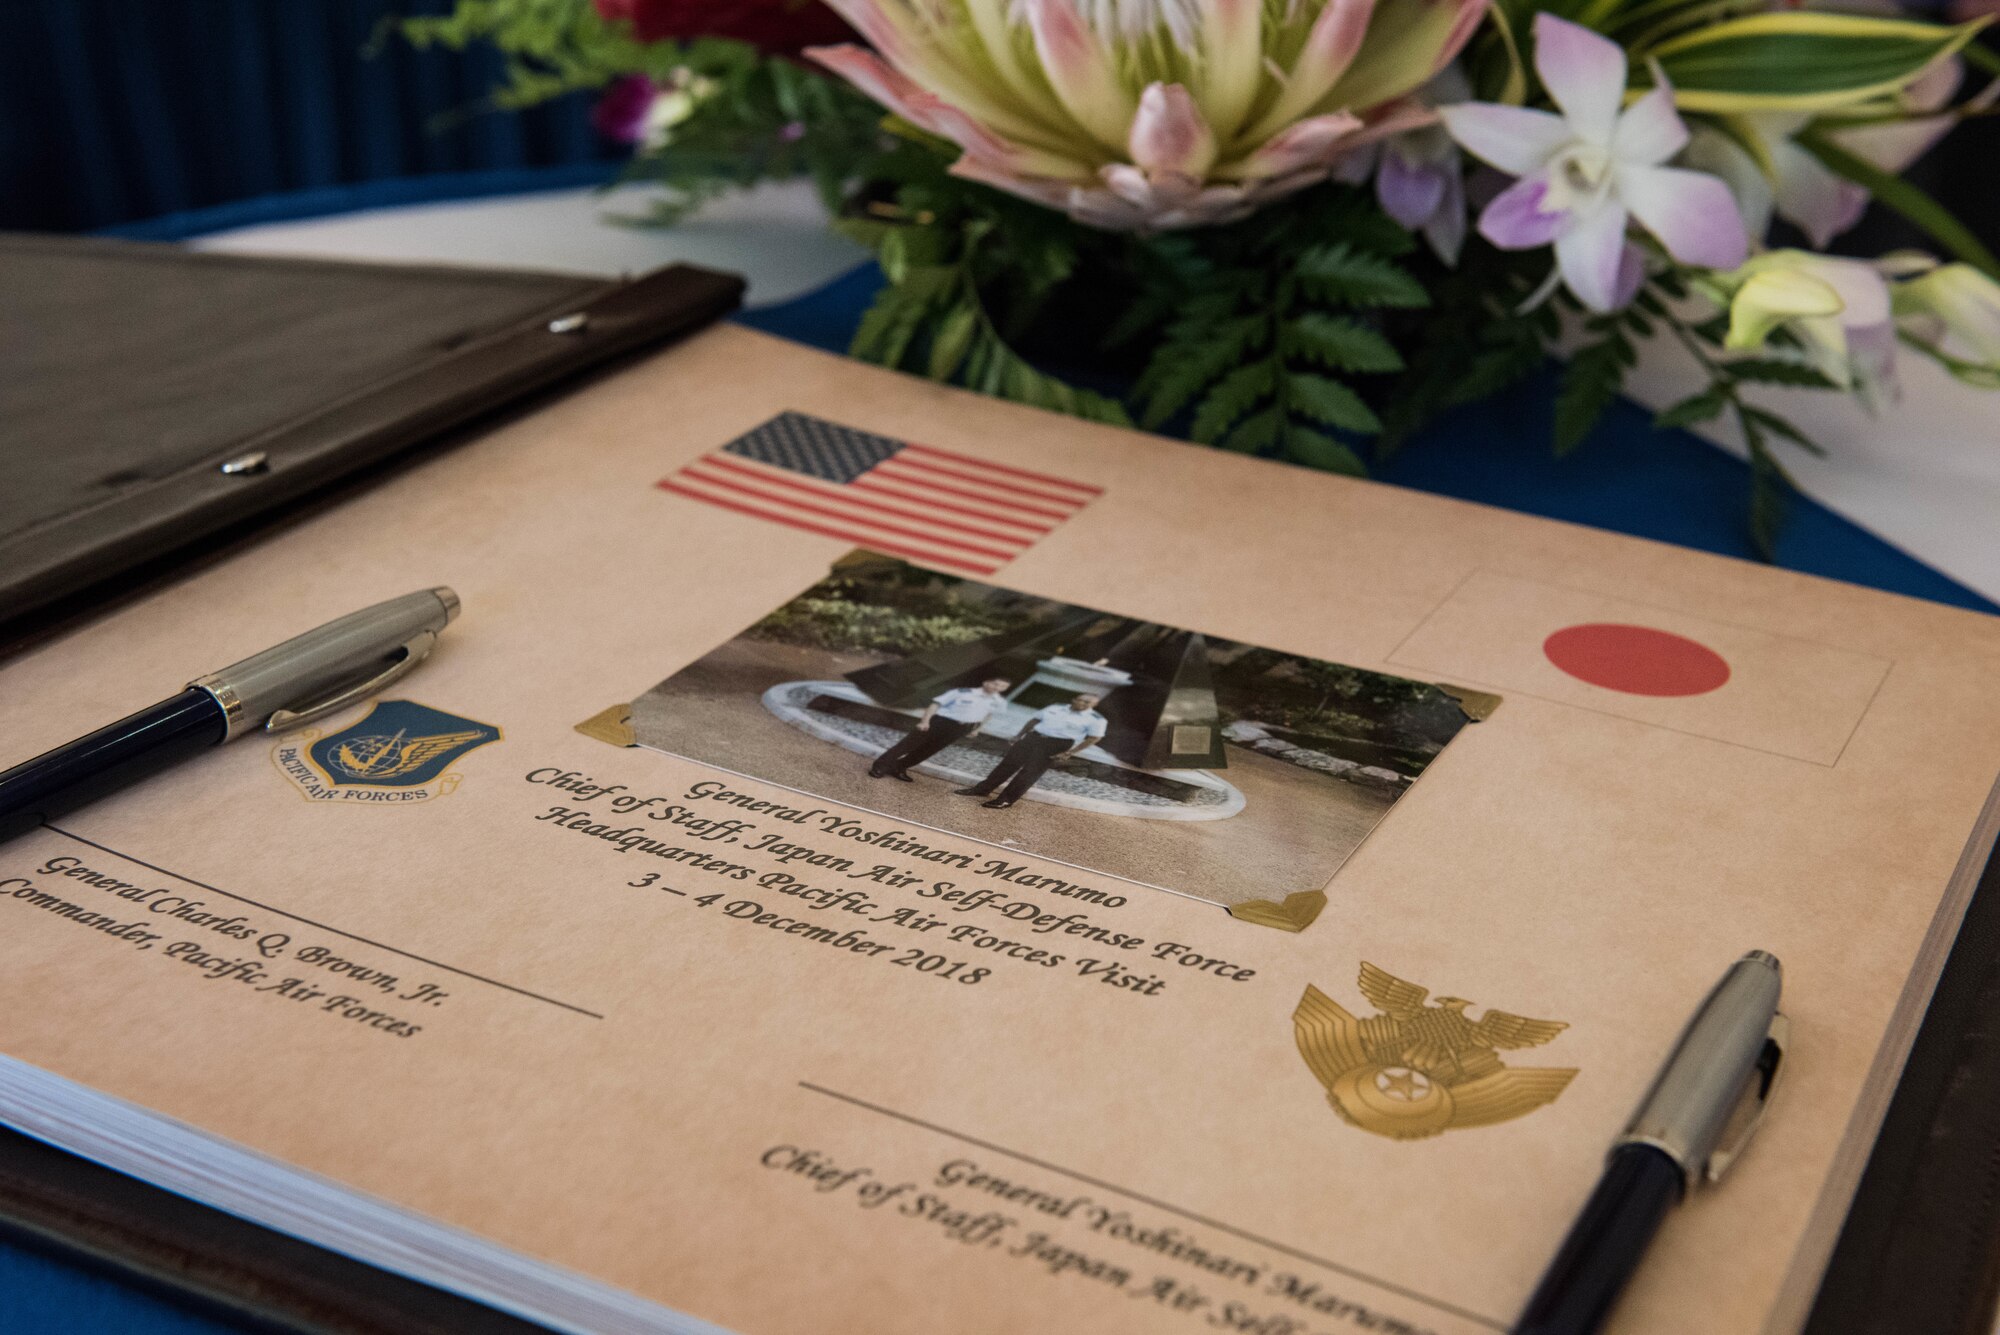 Gen. Yoshinari Marumo, Japanese Air Self-Defense Force chief of staff, and Gen. CQ Brown, Jr., Pacific Air Forces commander, sign a guest book during Marumo’s visit to Headquarters Pacific Air Forces on Joint Base Pearl Harbor-Hickam, Hawaii, Dec. 4, 2018. As part of his trip, Marumo met with PACAF leadership to discuss the PACAF strategy and future engagements. The U.S. and Japan routinely work together to promote security cooperation and support a free and open Indo-Pacific region. (U.S. Air Force photo/Staff Sgt. Hailey Haux)